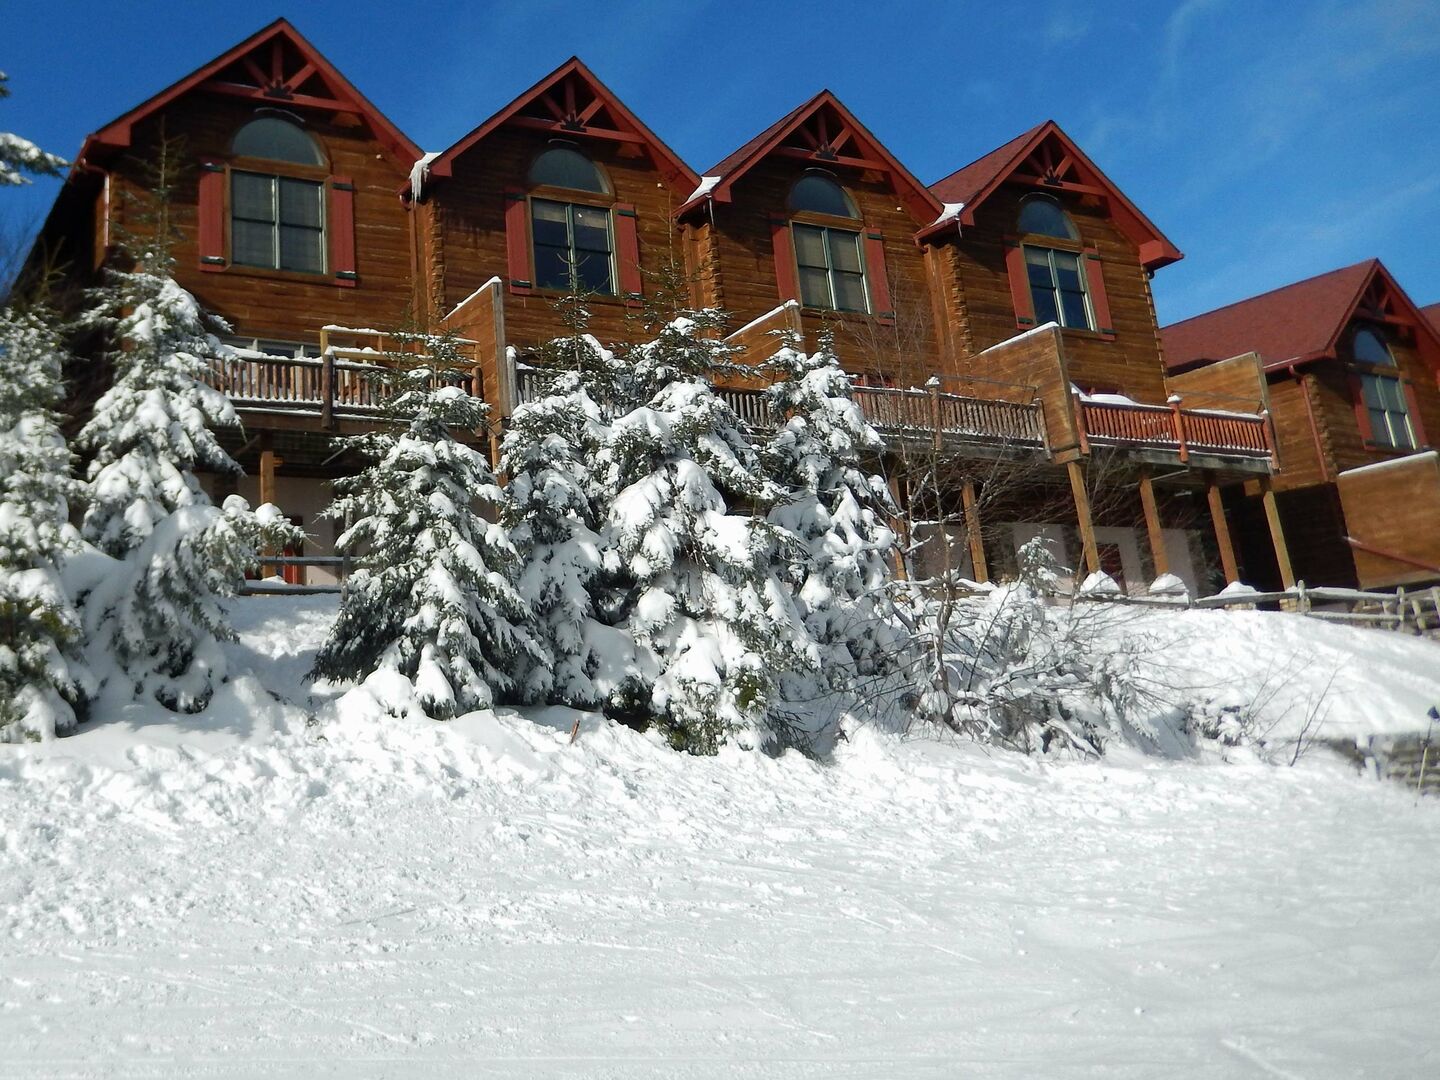 We welcome you to Loggers Run # 8.  Nicely appointed, comfortable lodging in one of the best slopeside locations in the resort.